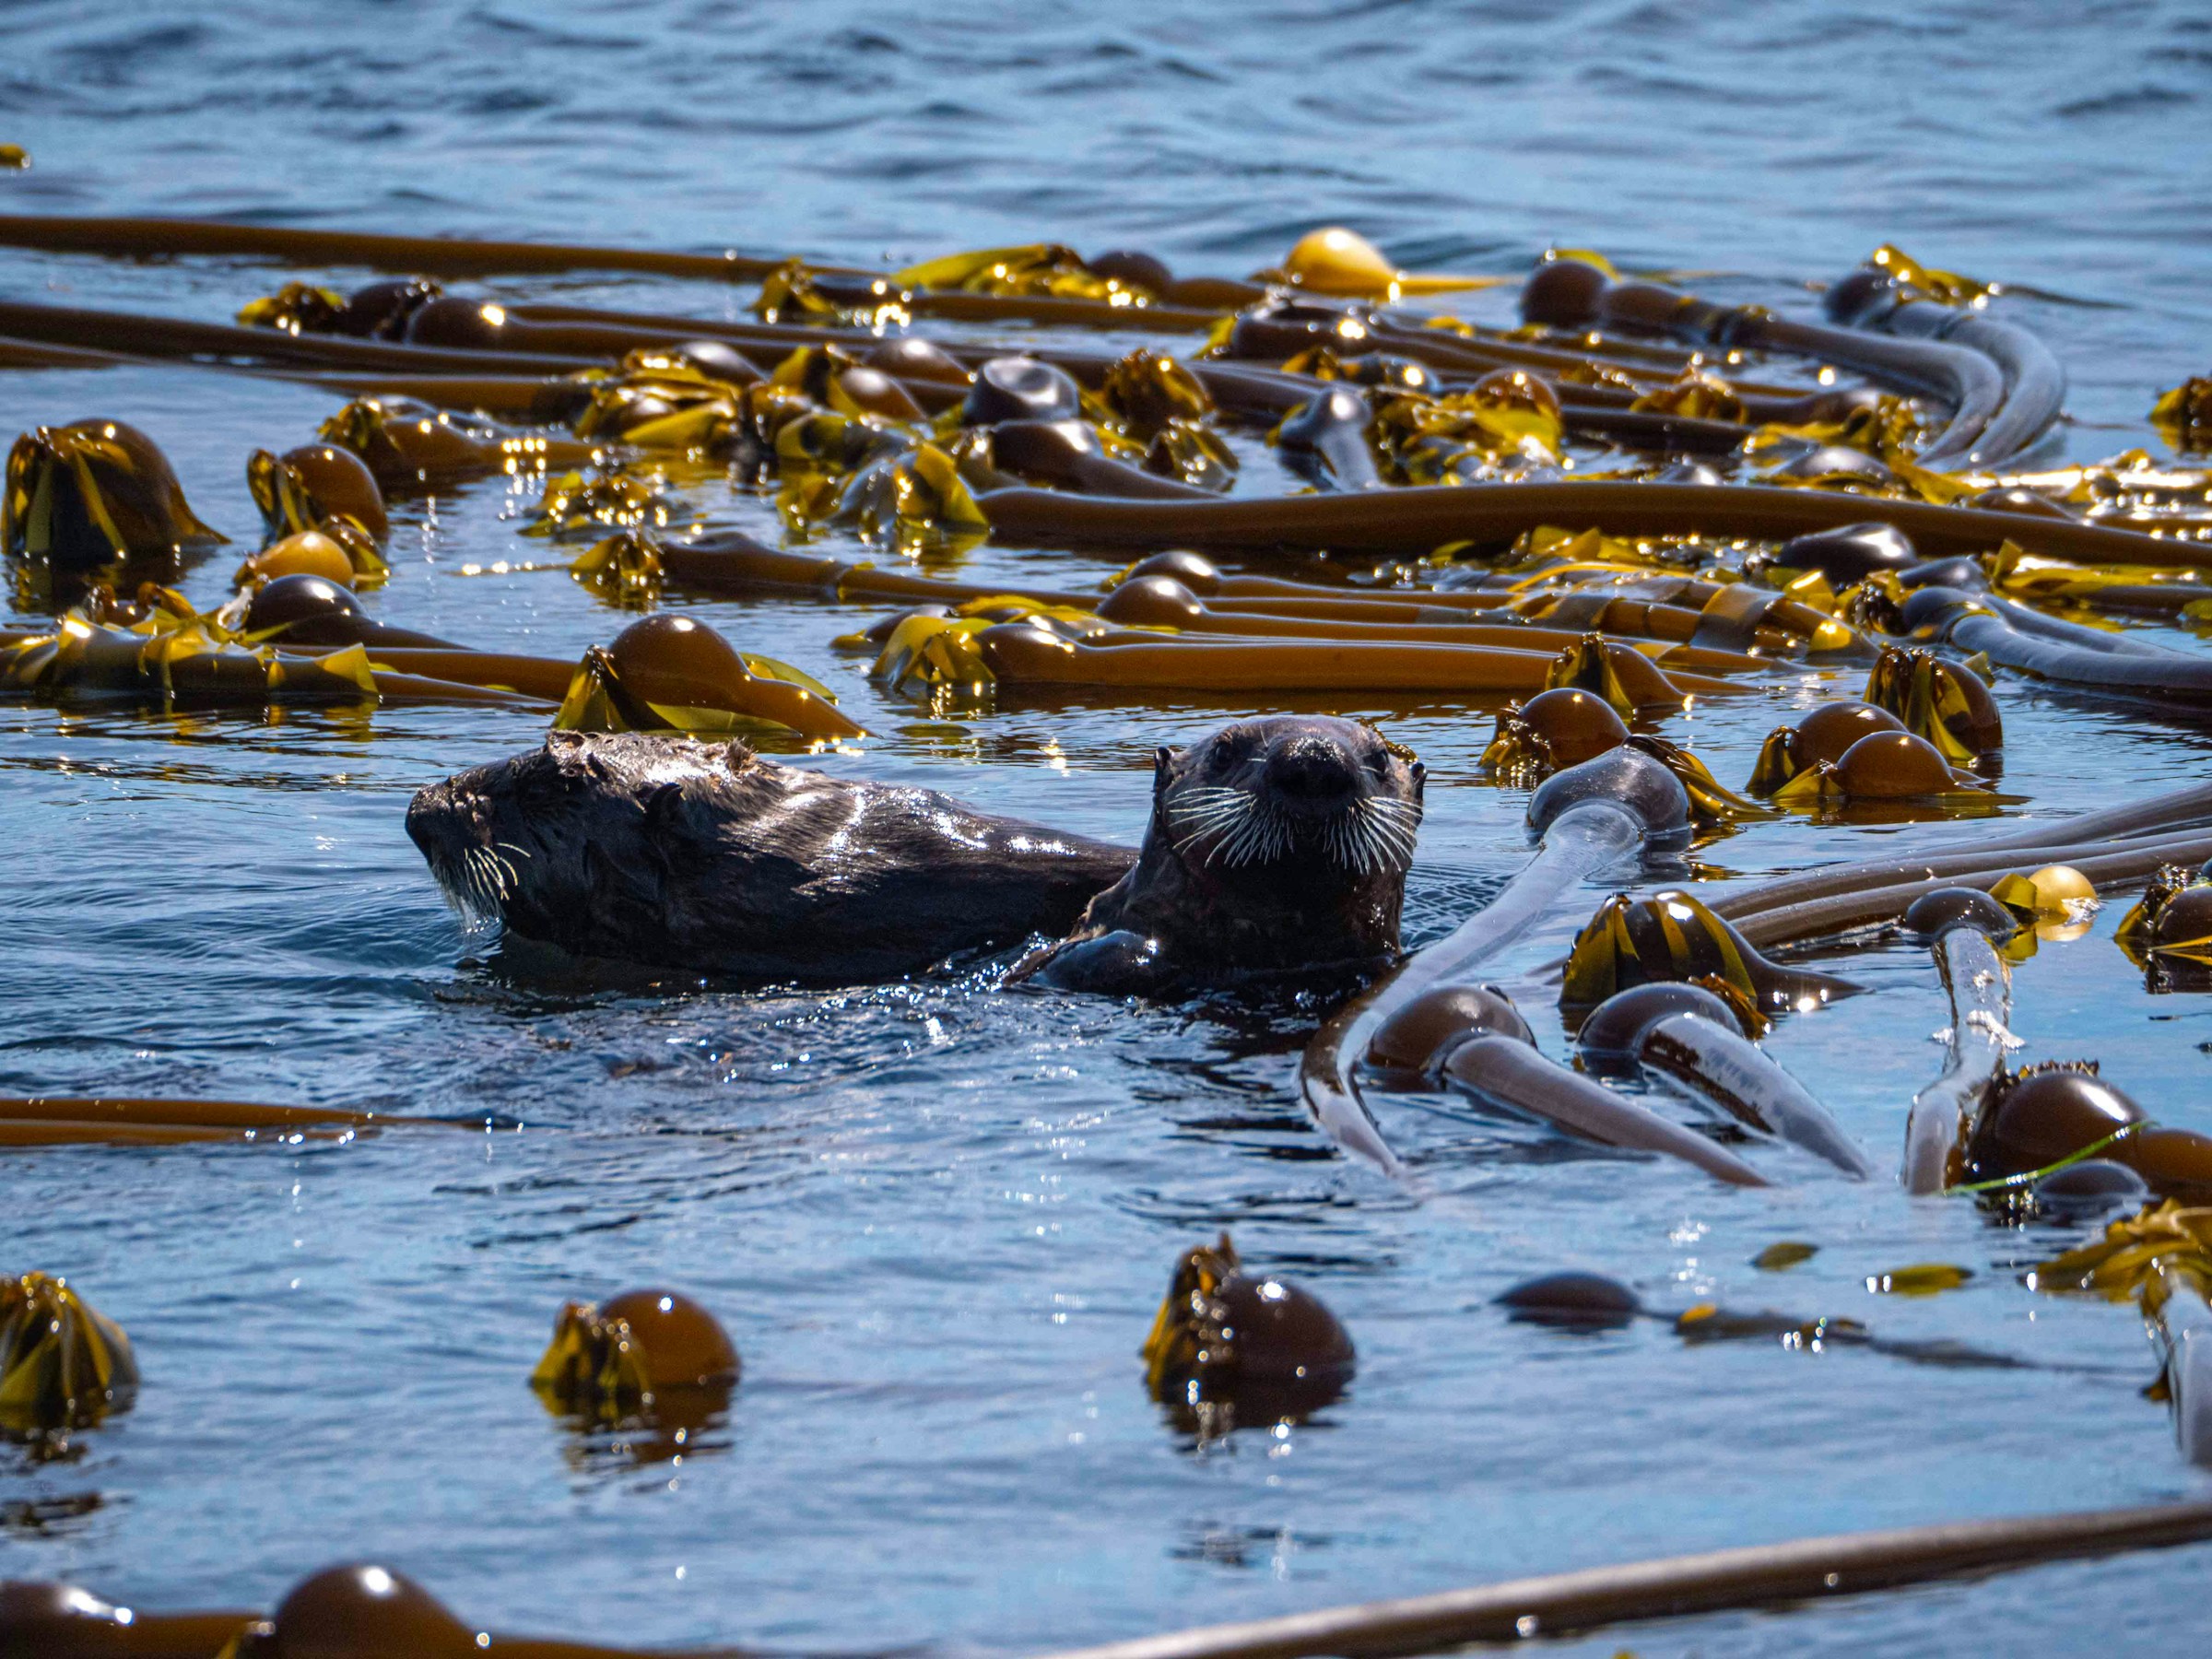 otters swimming among kelp in the water